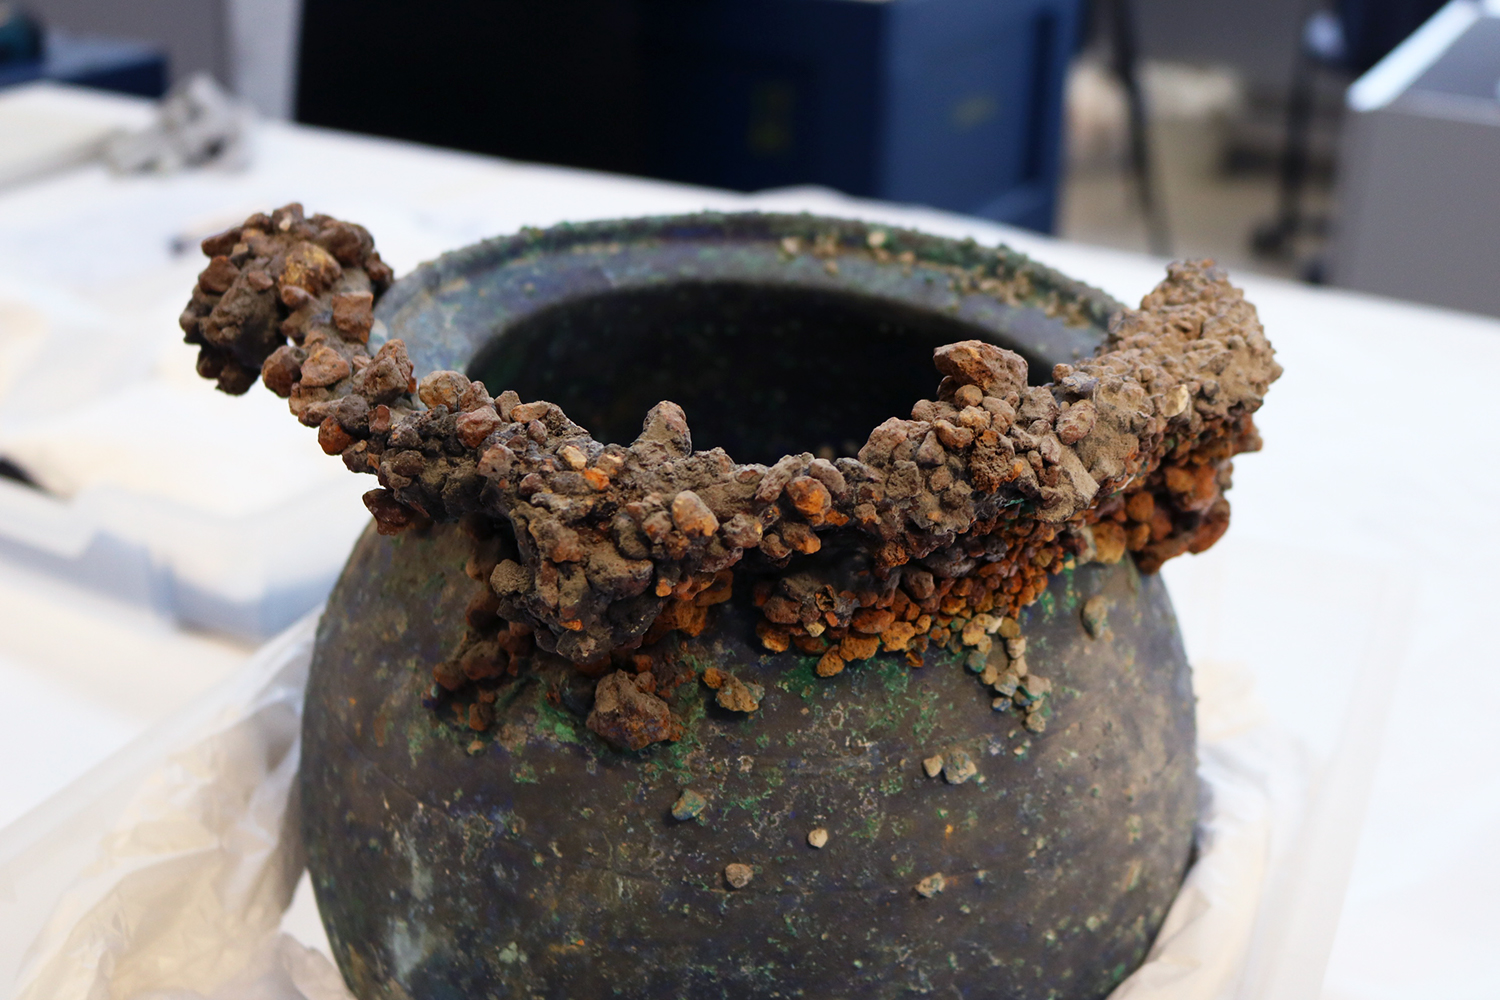 A 79AD pot encrusted with volcanic stones